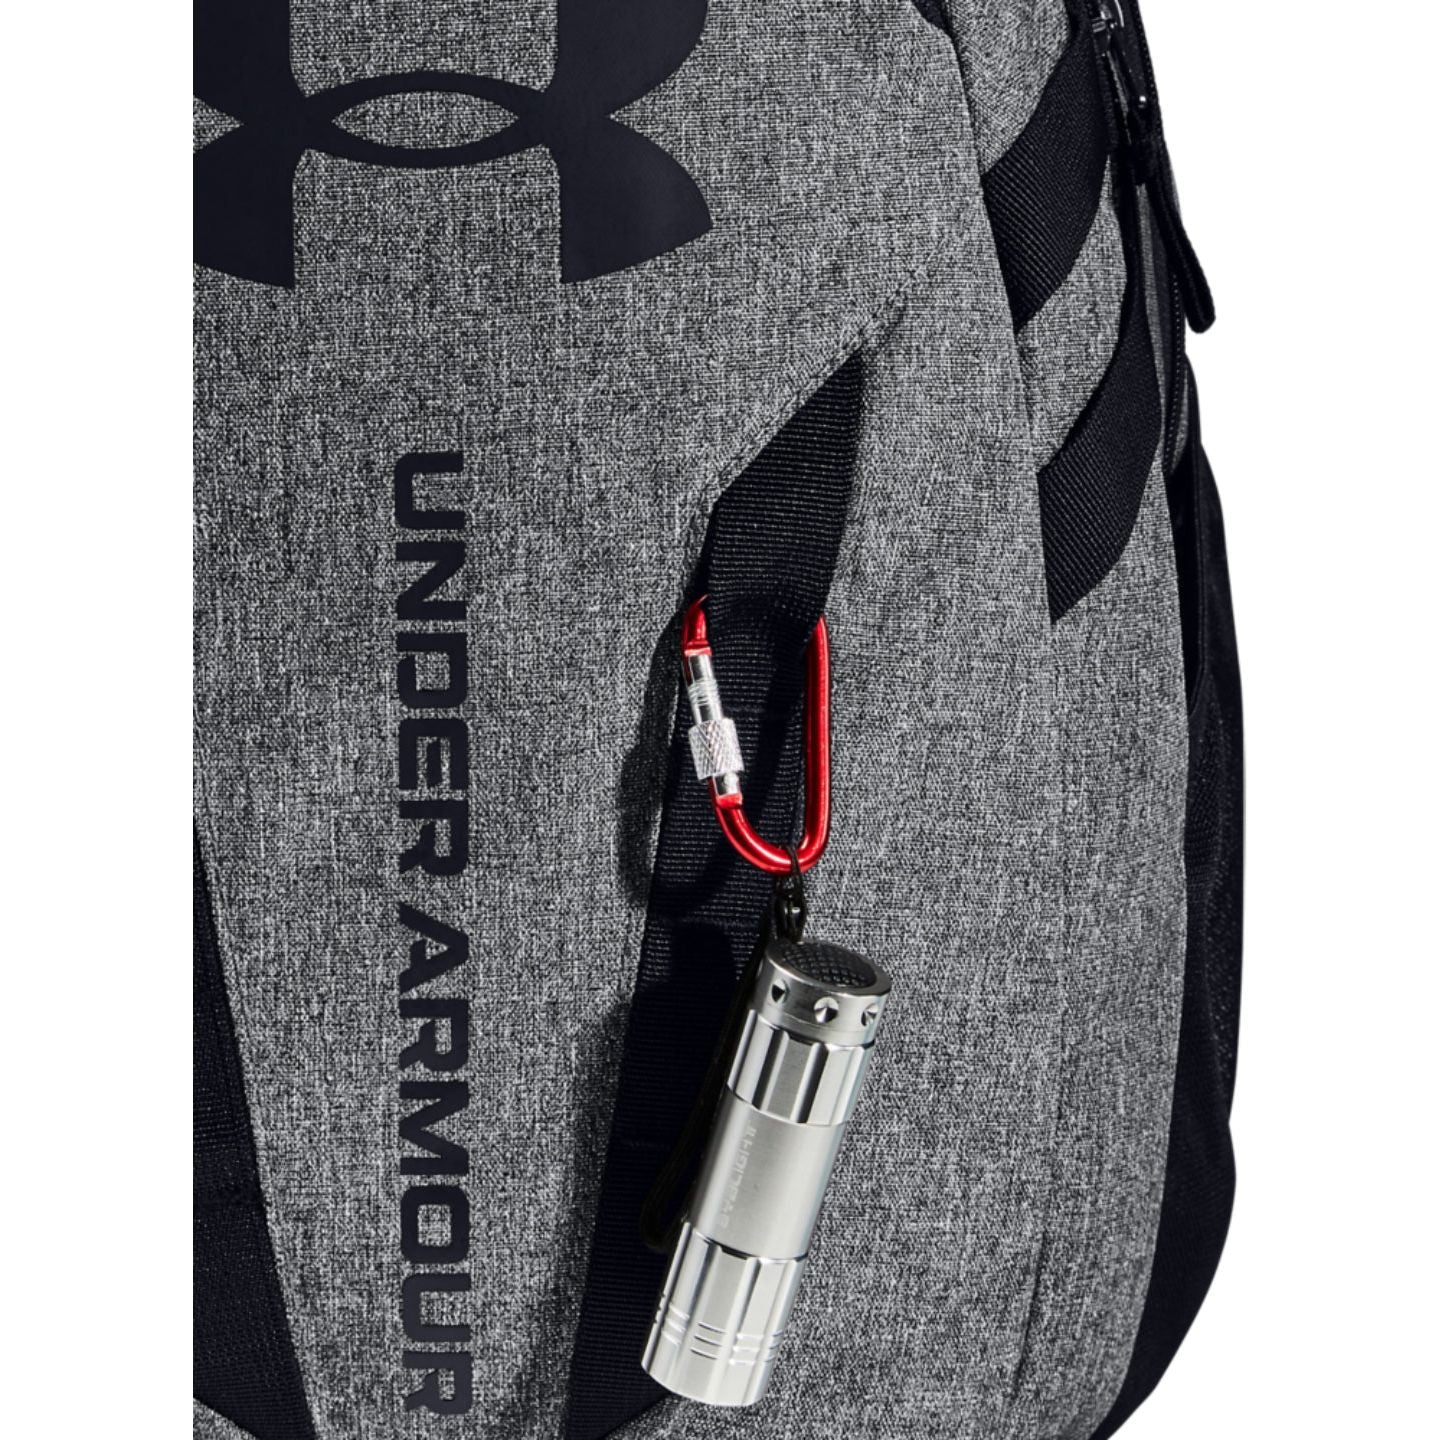 Under Armour Hustle 5.0 Backpack - Graphite